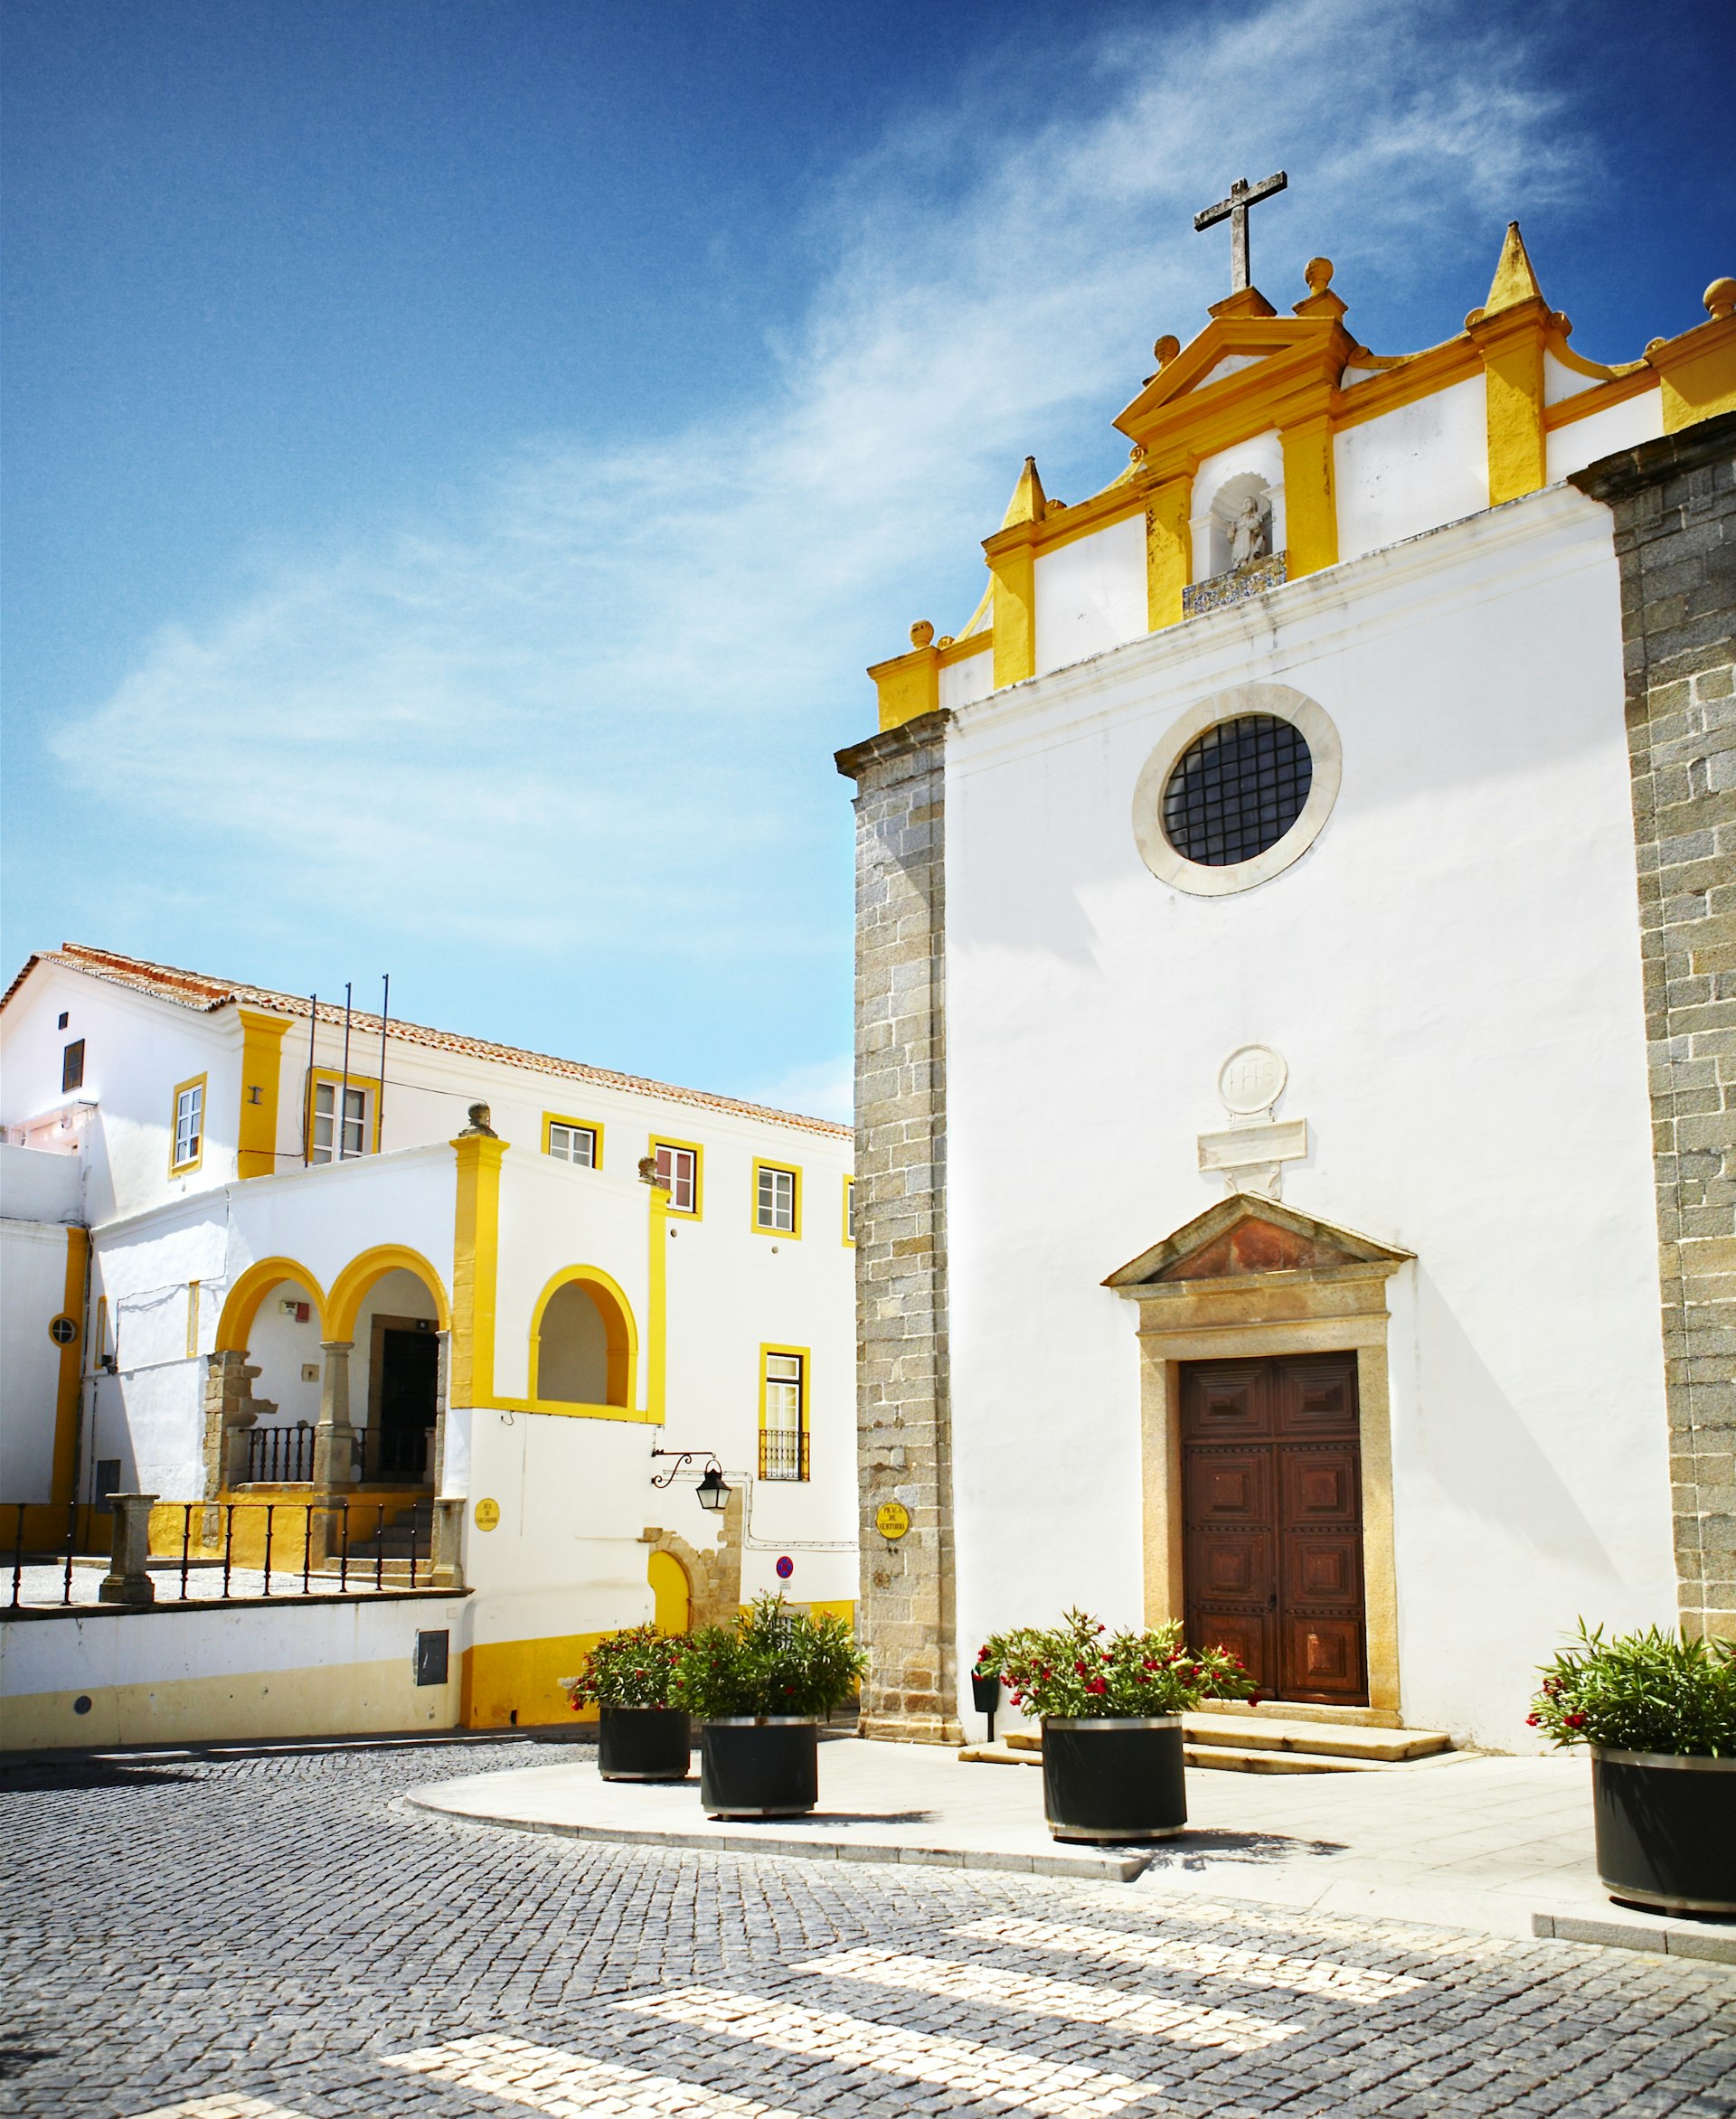 The sun shines on the white and yellow buildings of a Portuguese town. 